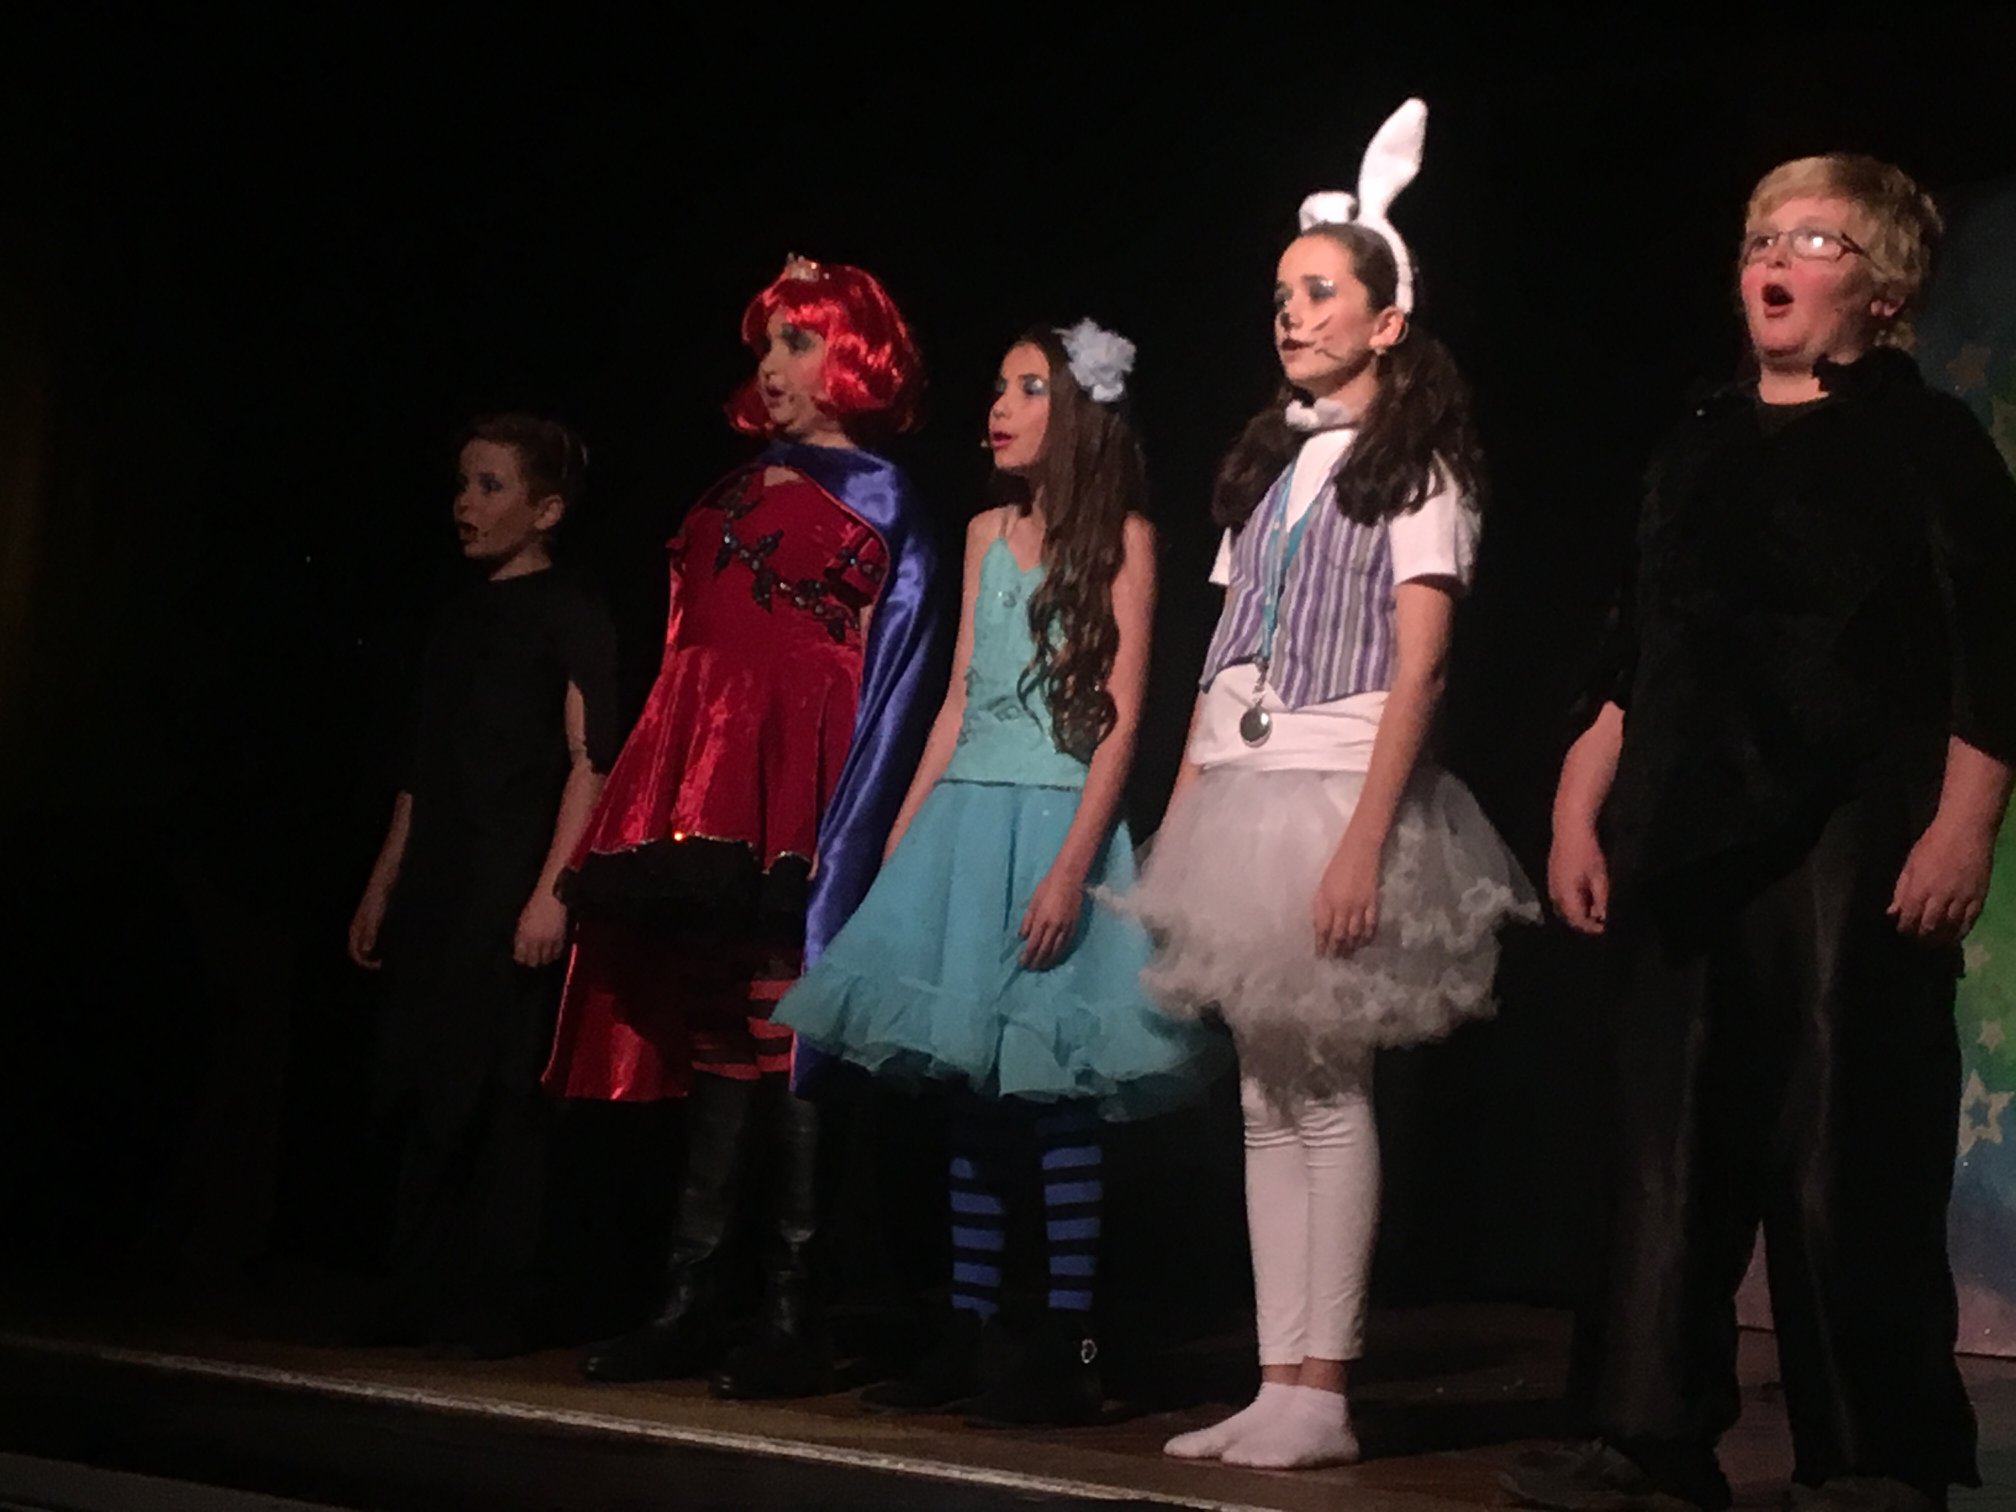 5 drama students on stage dressed in outfits from Alice in Wonderland